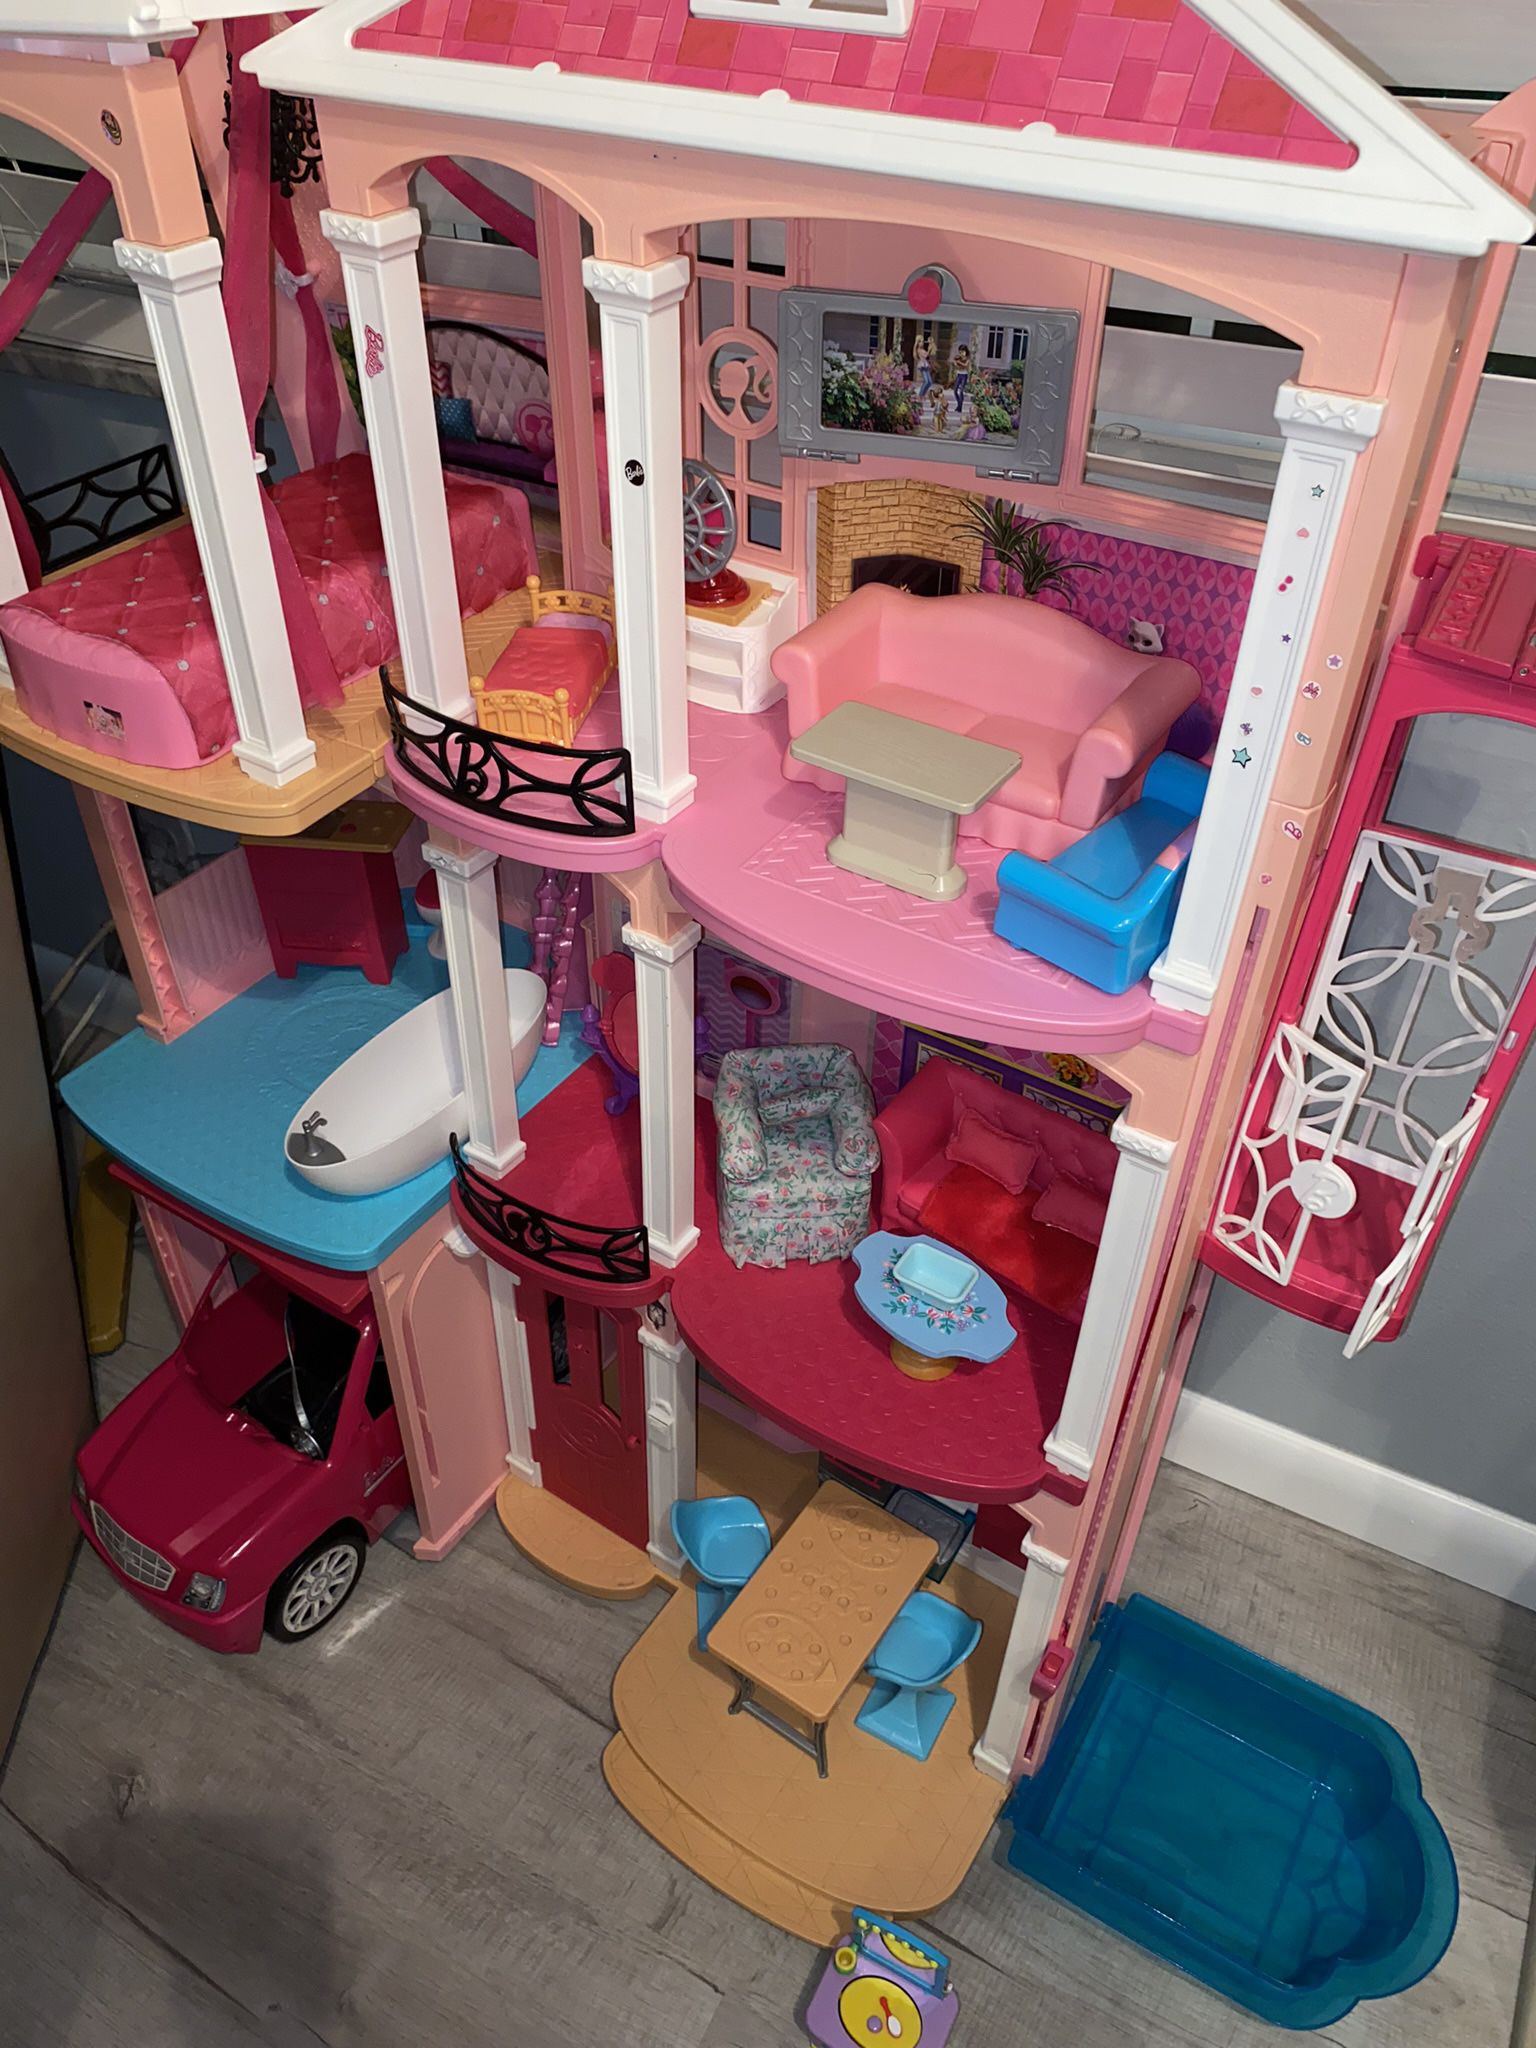 ✅New Mattel Barbie 3 Story Pink Furnished Doll Town house Dreamhouse  Townhouse✅✅